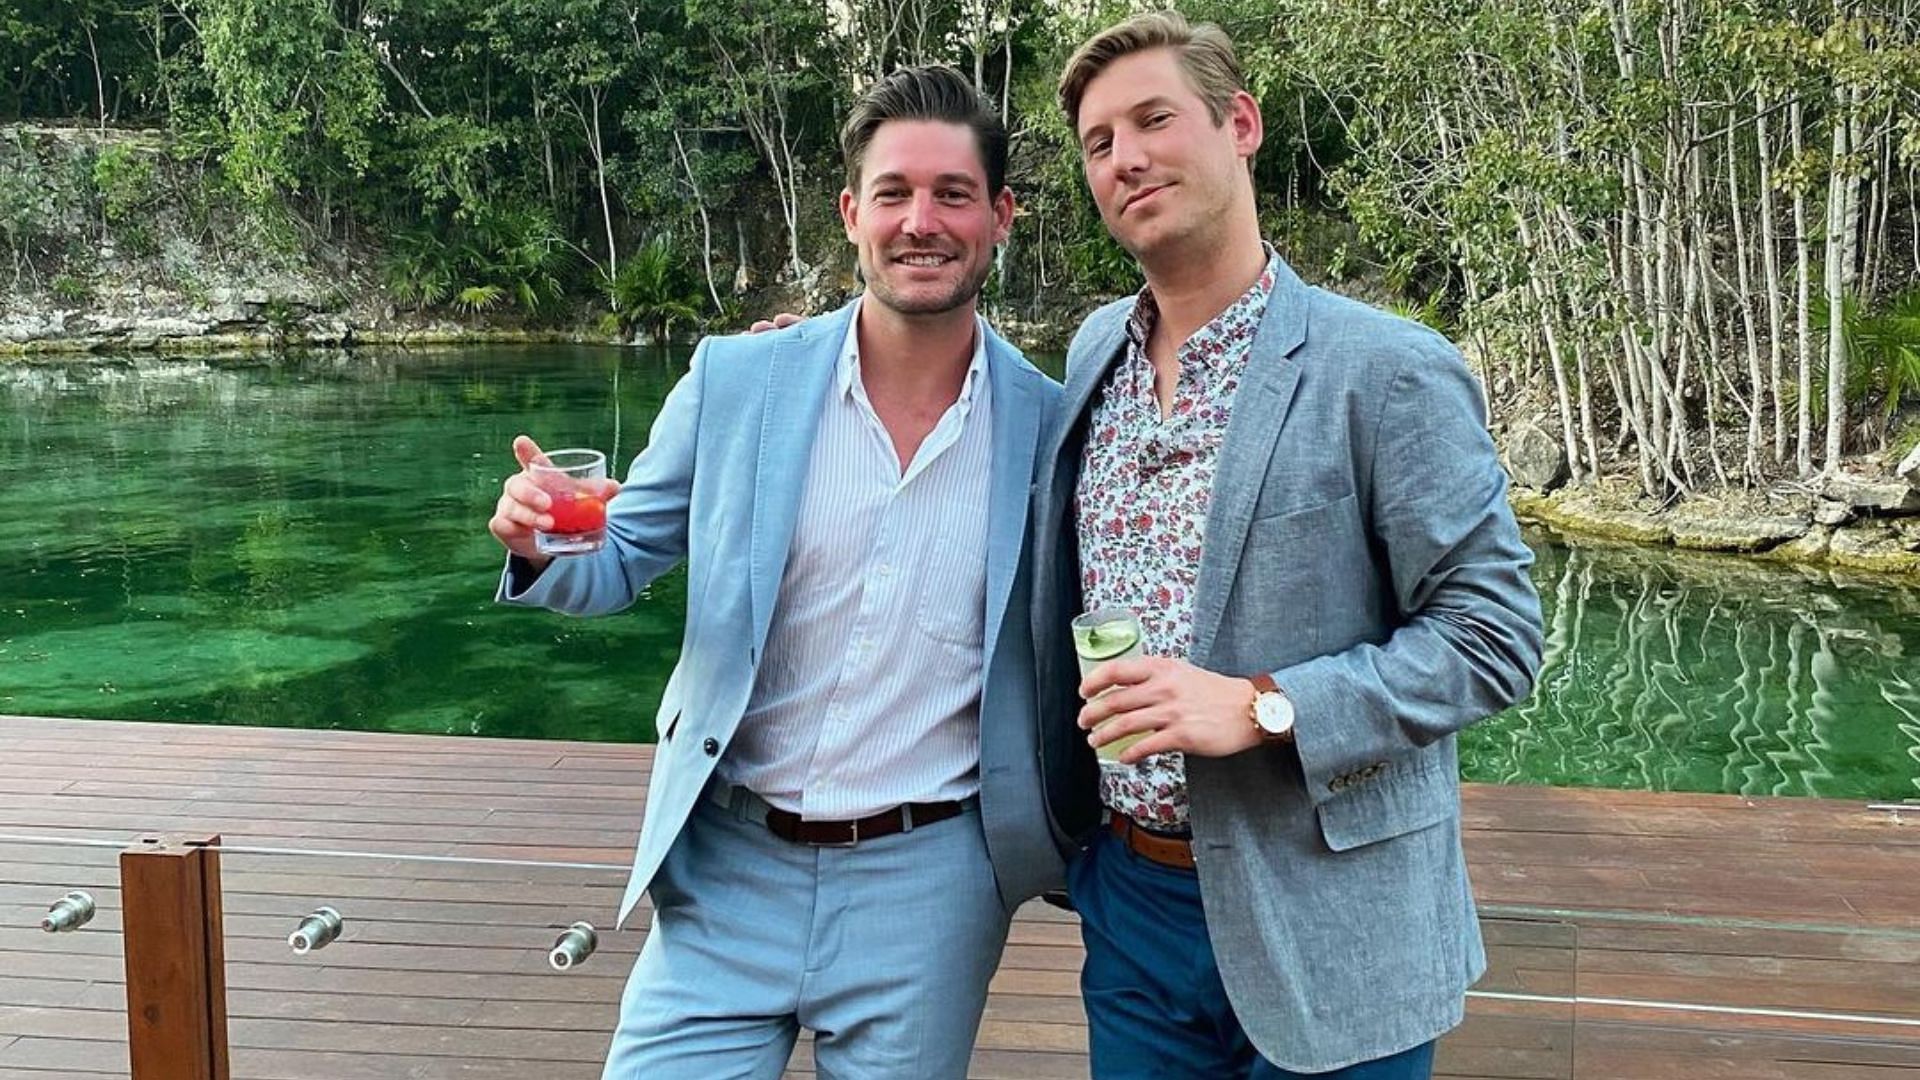 Craig Conover and Austen Kroll from Summer House (Image via caconover/Instagram)